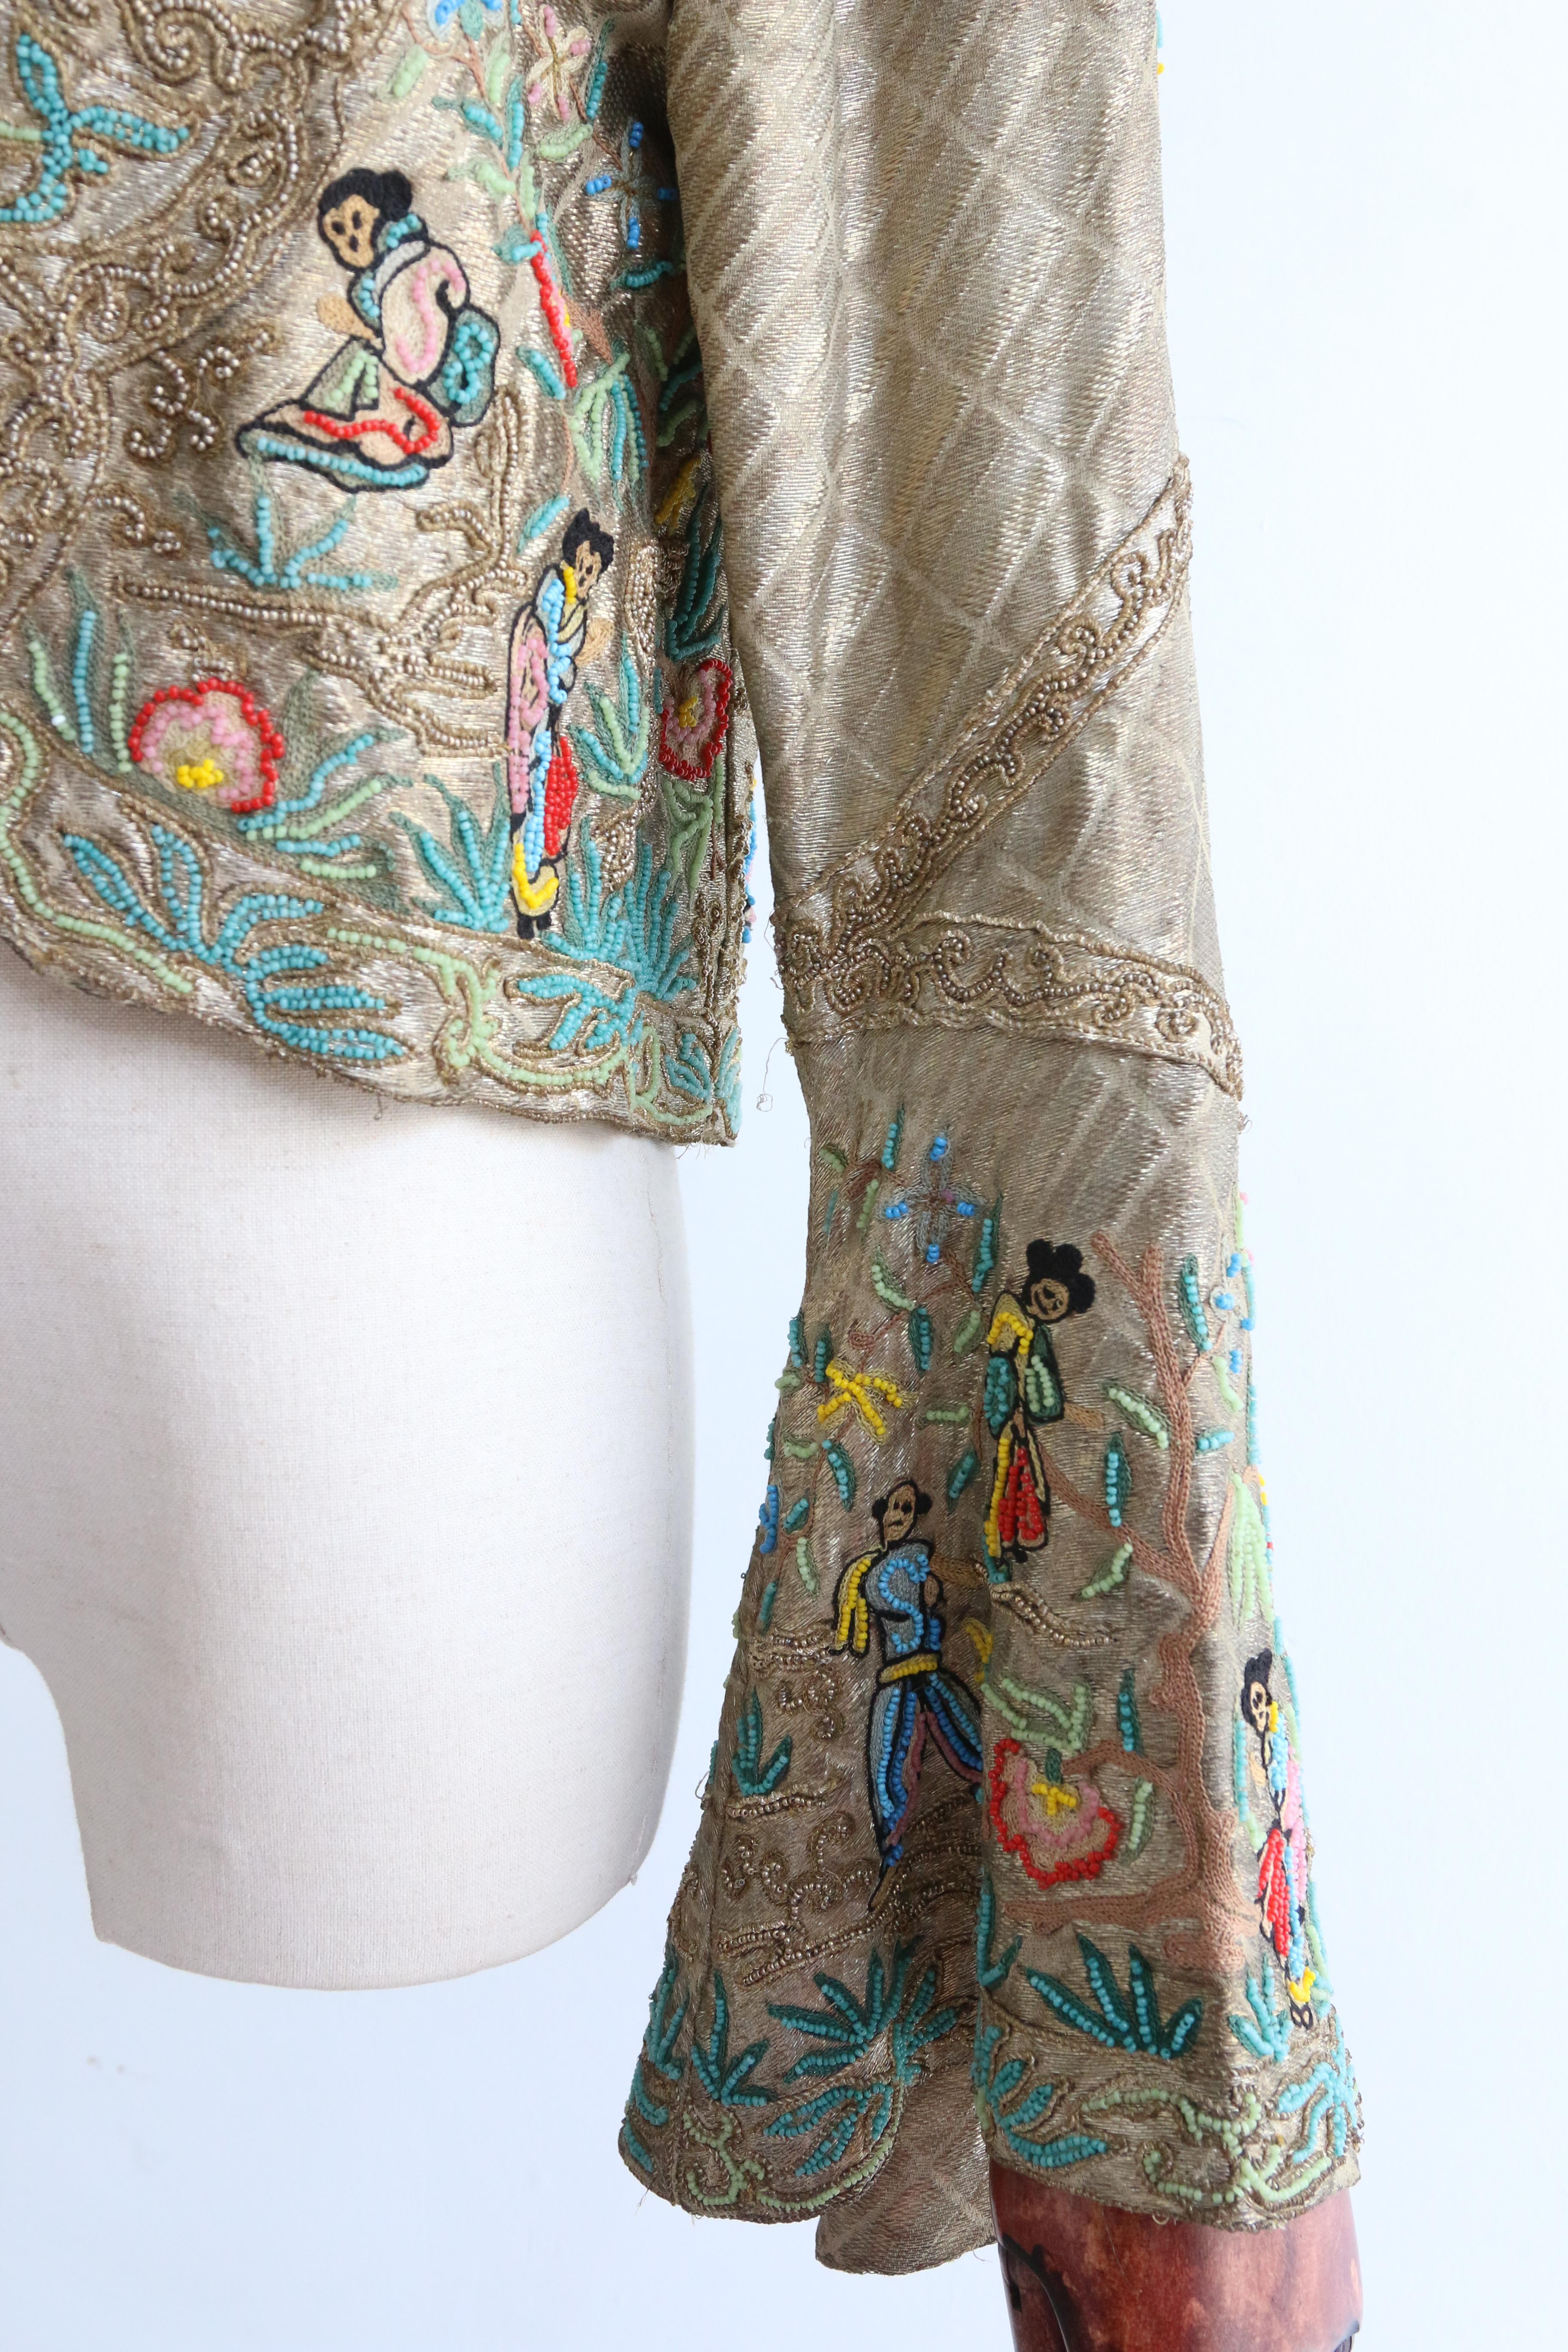 Full of opulent original details, rendered in the most luxurious fashion, this rare 1920's  gold lamé, beaded and embroidered jacket  is a beauty to behold and never again find.

The edge to edge cut of the jacket, boasts a rounded edge to the front